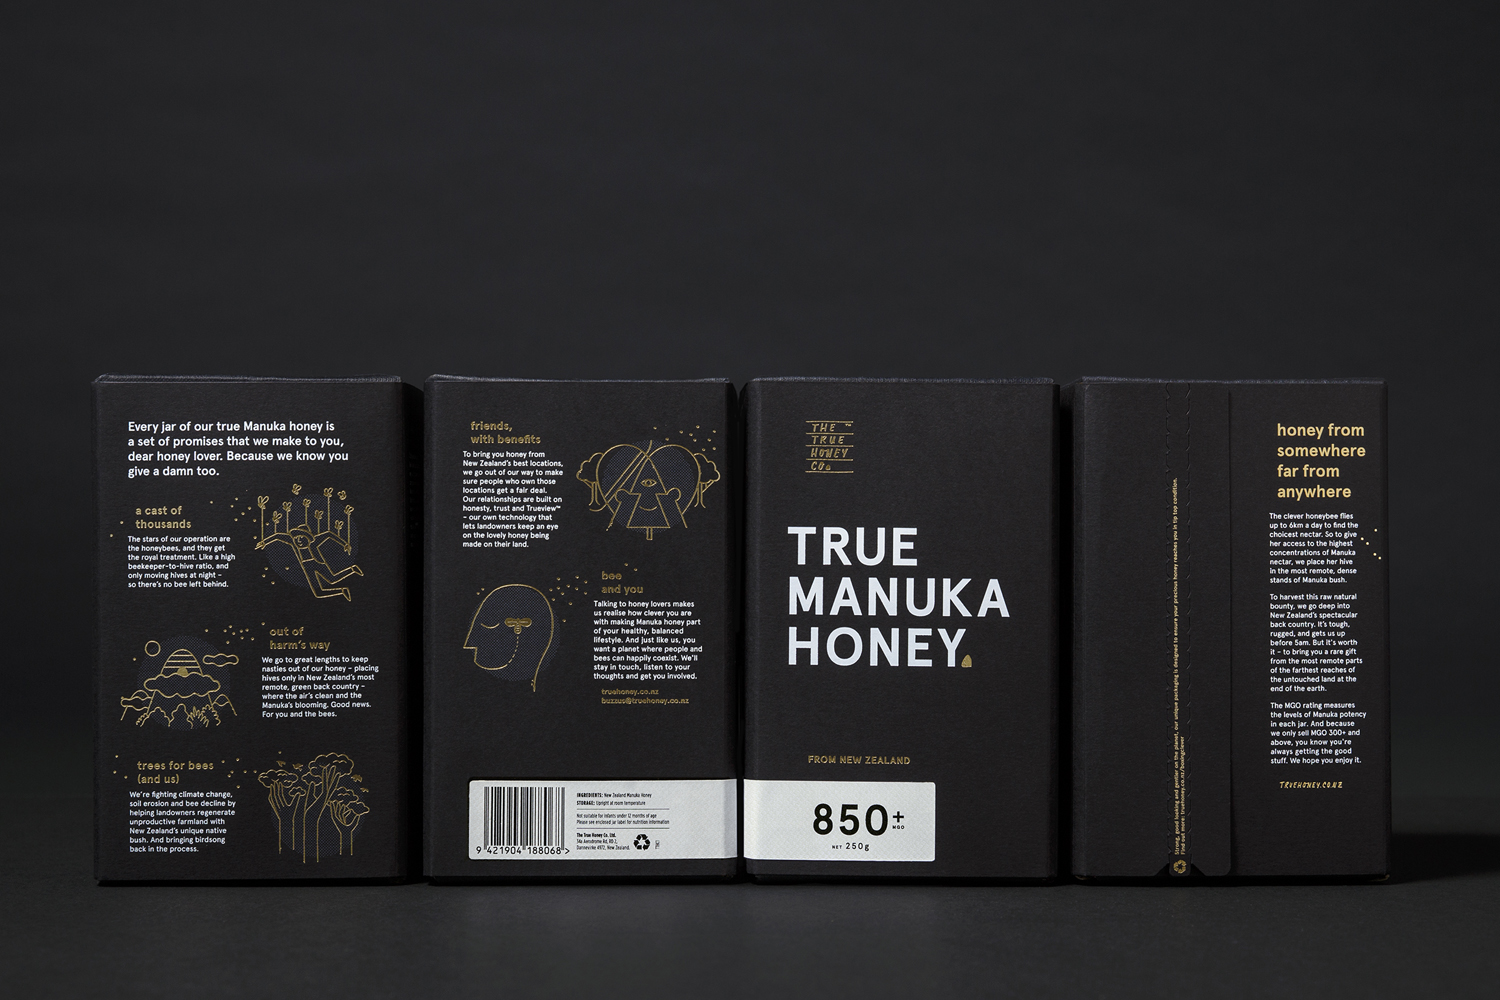 Brand identity and packaging with white ink and gold foil detail by Marx Design for The True Honey Company, a New Zealand-based business specialising in mānuka honey